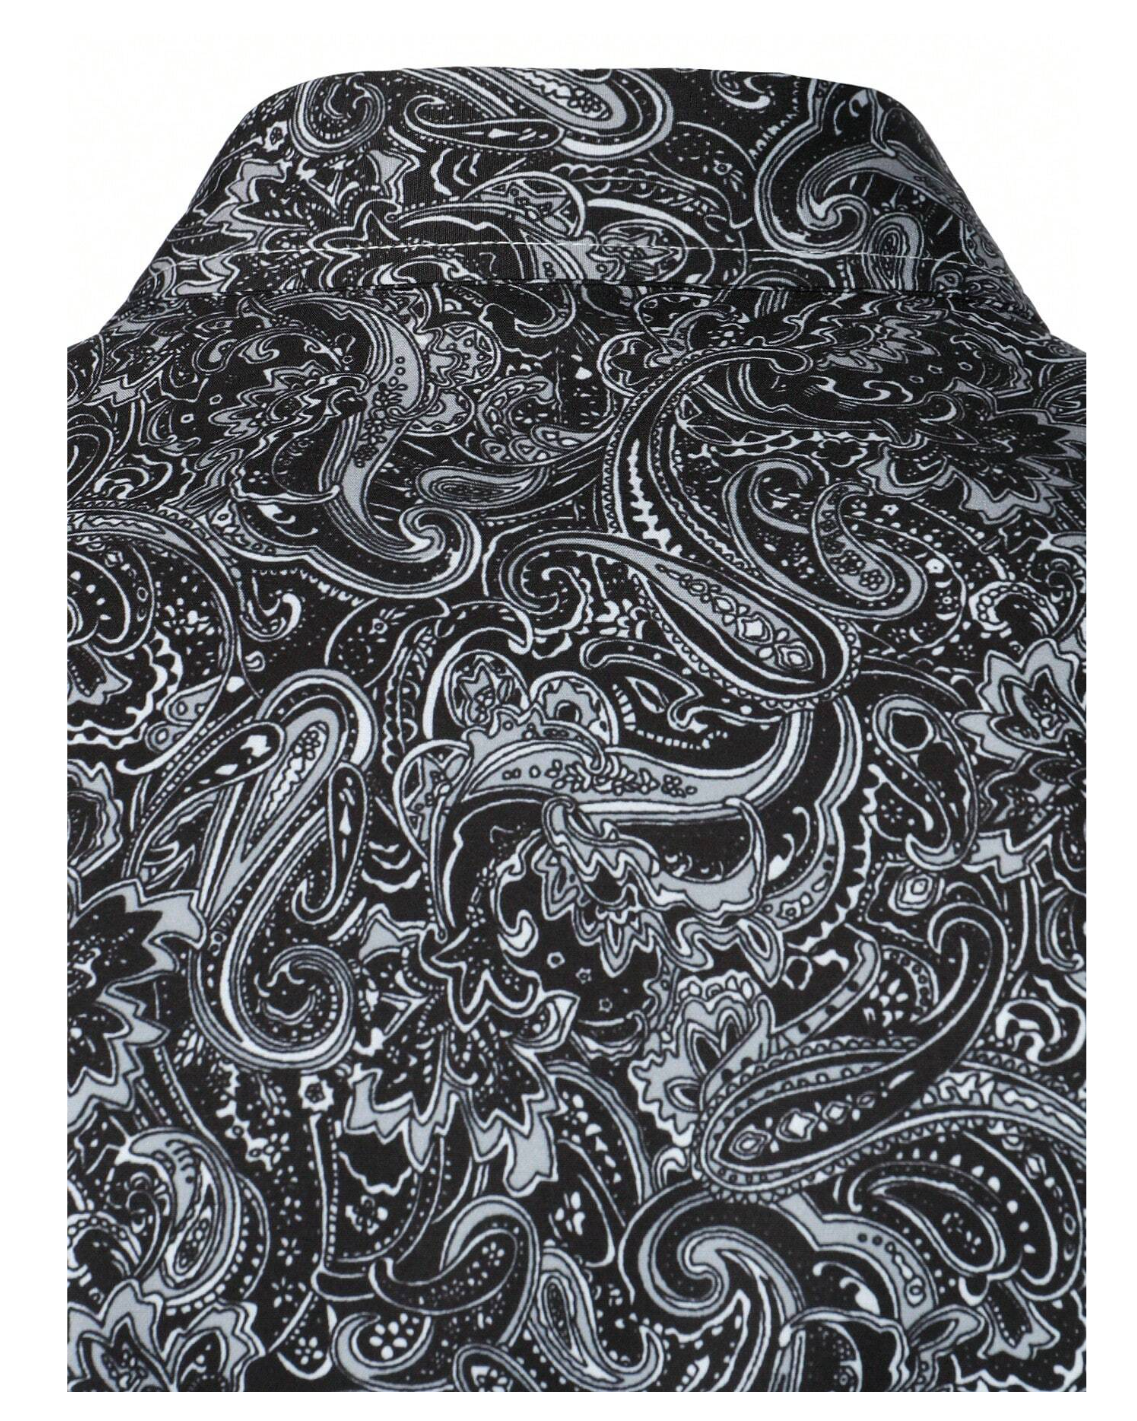 Paisley Elegance: Elevate Your Style with Manfinity Homme Men's Distinctive Print Shirt.